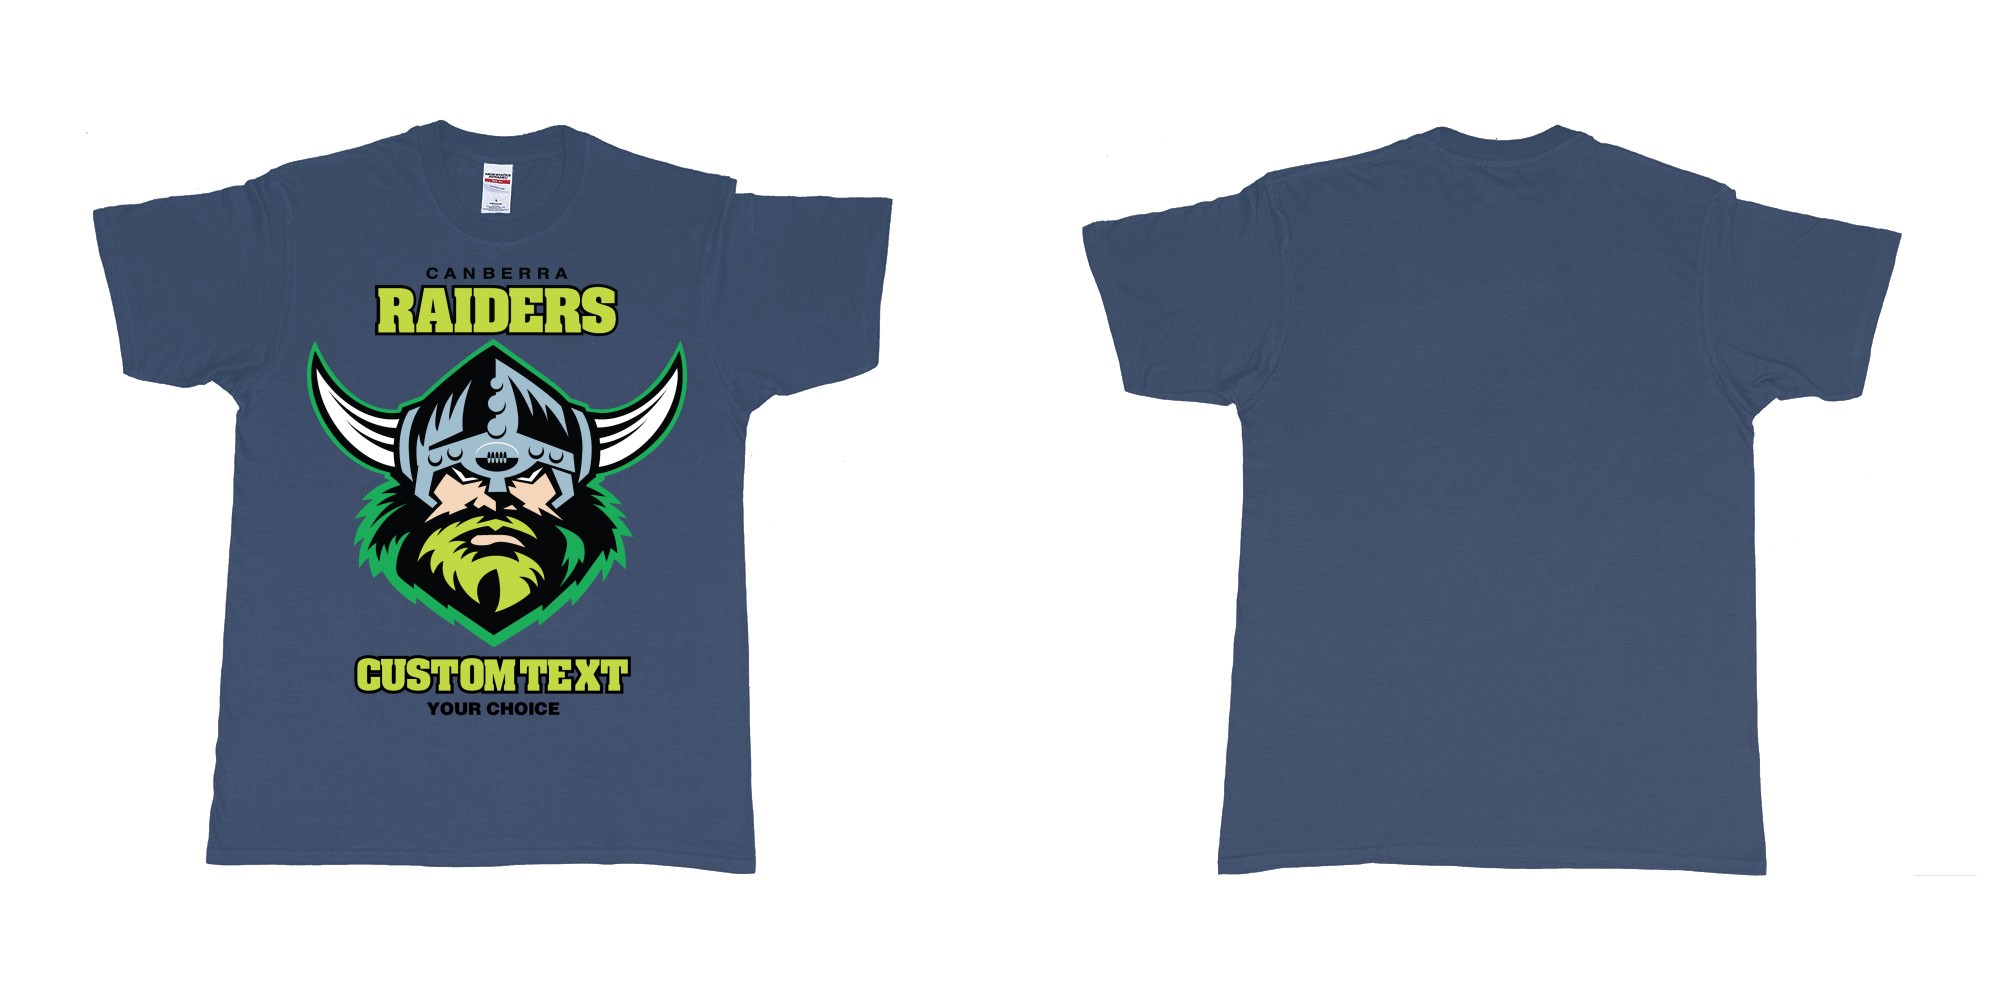 Custom tshirt design canberra raiders nrl logo own printed text near you in fabric color navy choice your own text made in Bali by The Pirate Way